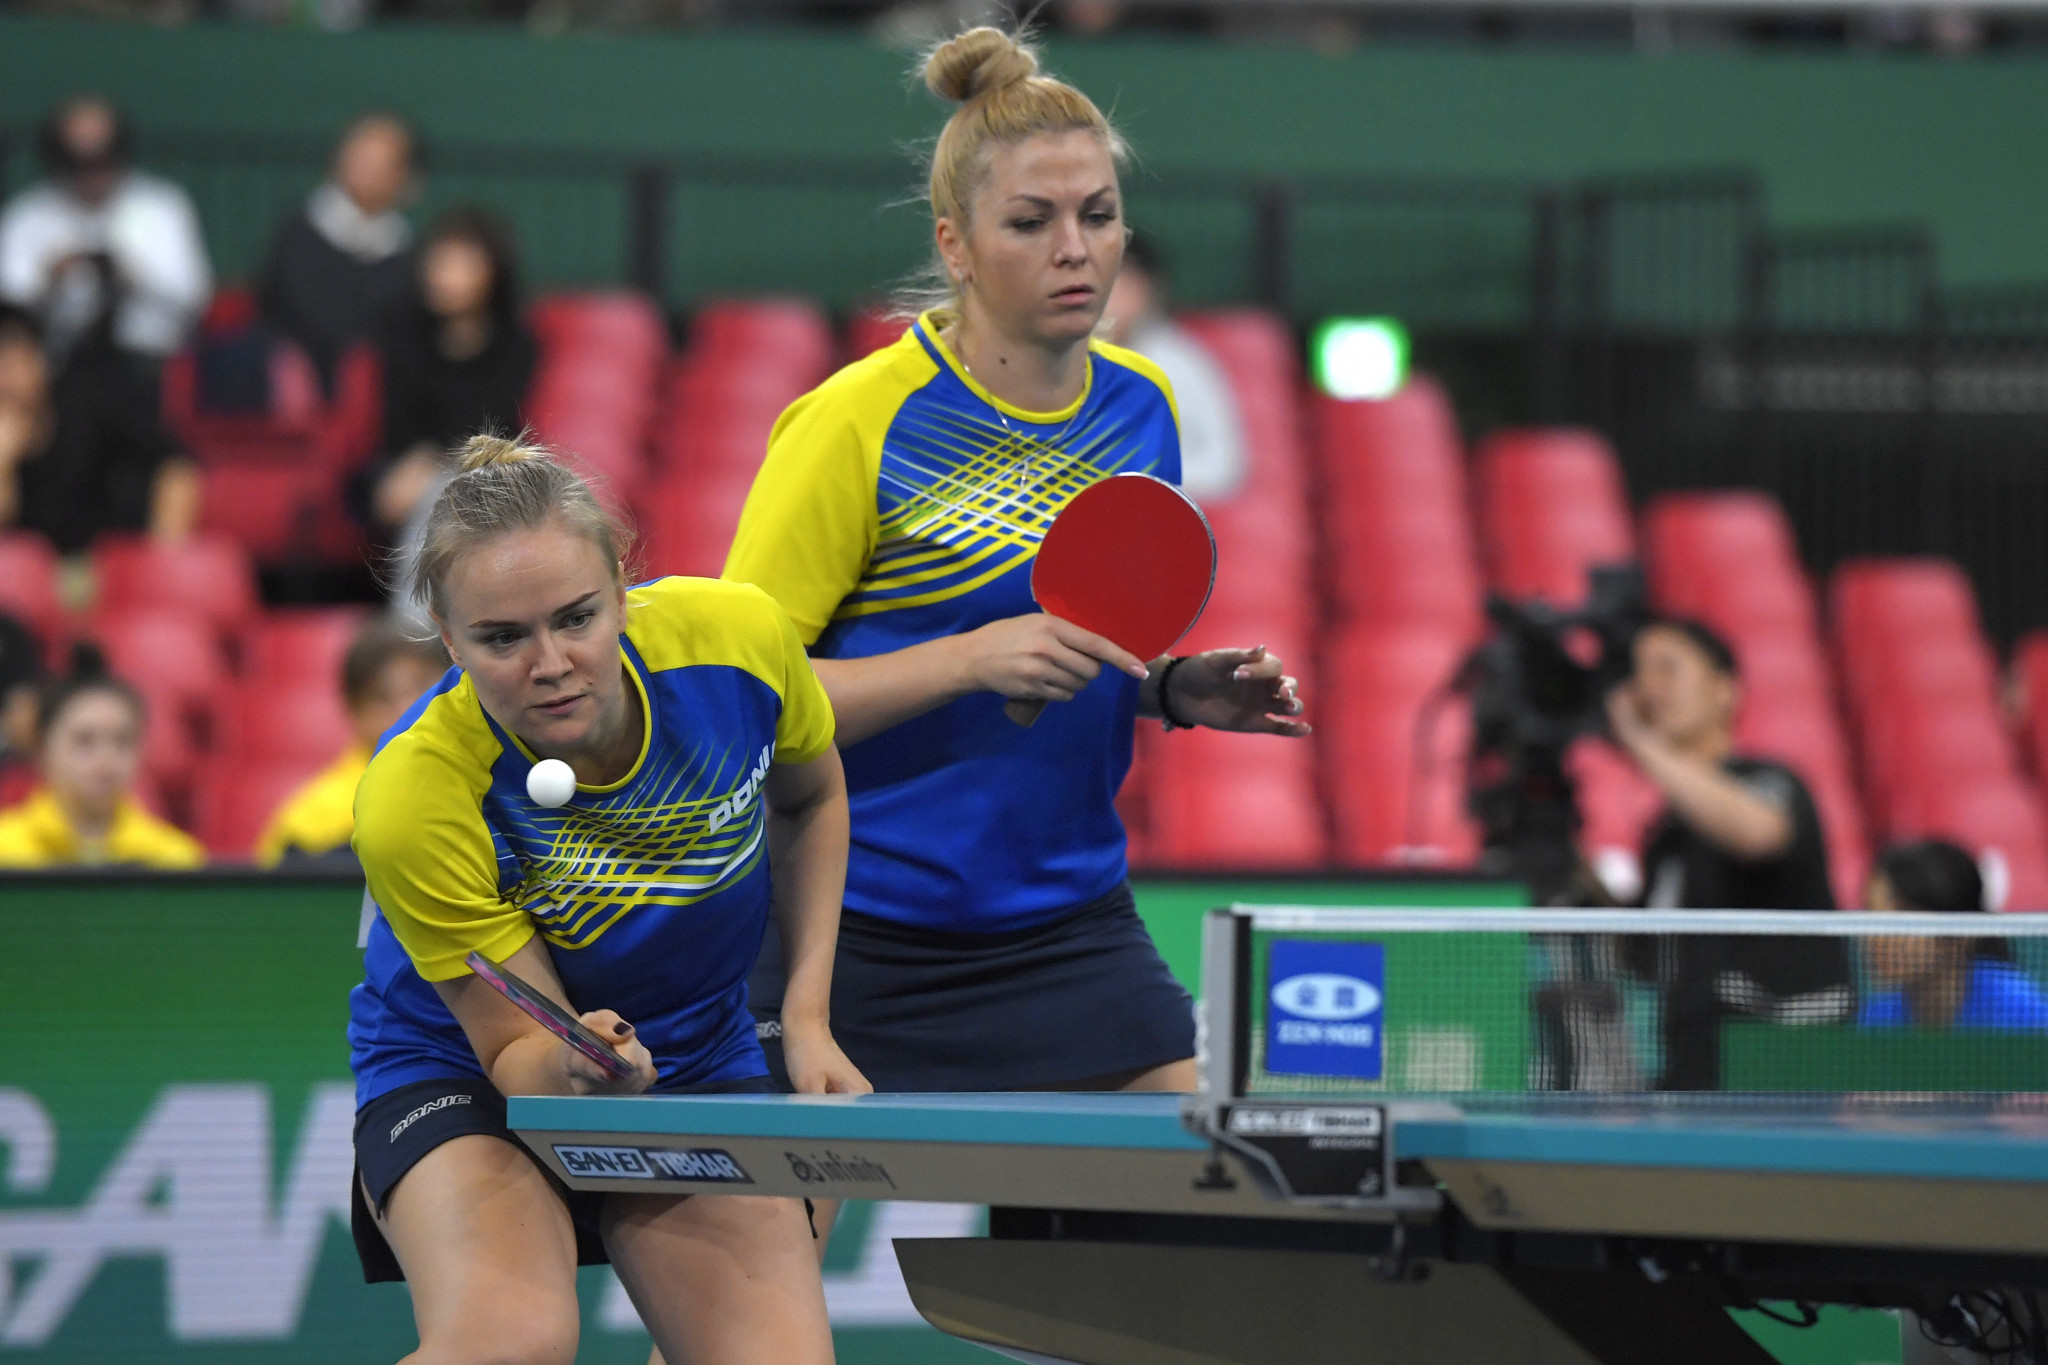 Four Ukrainian players set to take part in WTT Star Contender in Doha